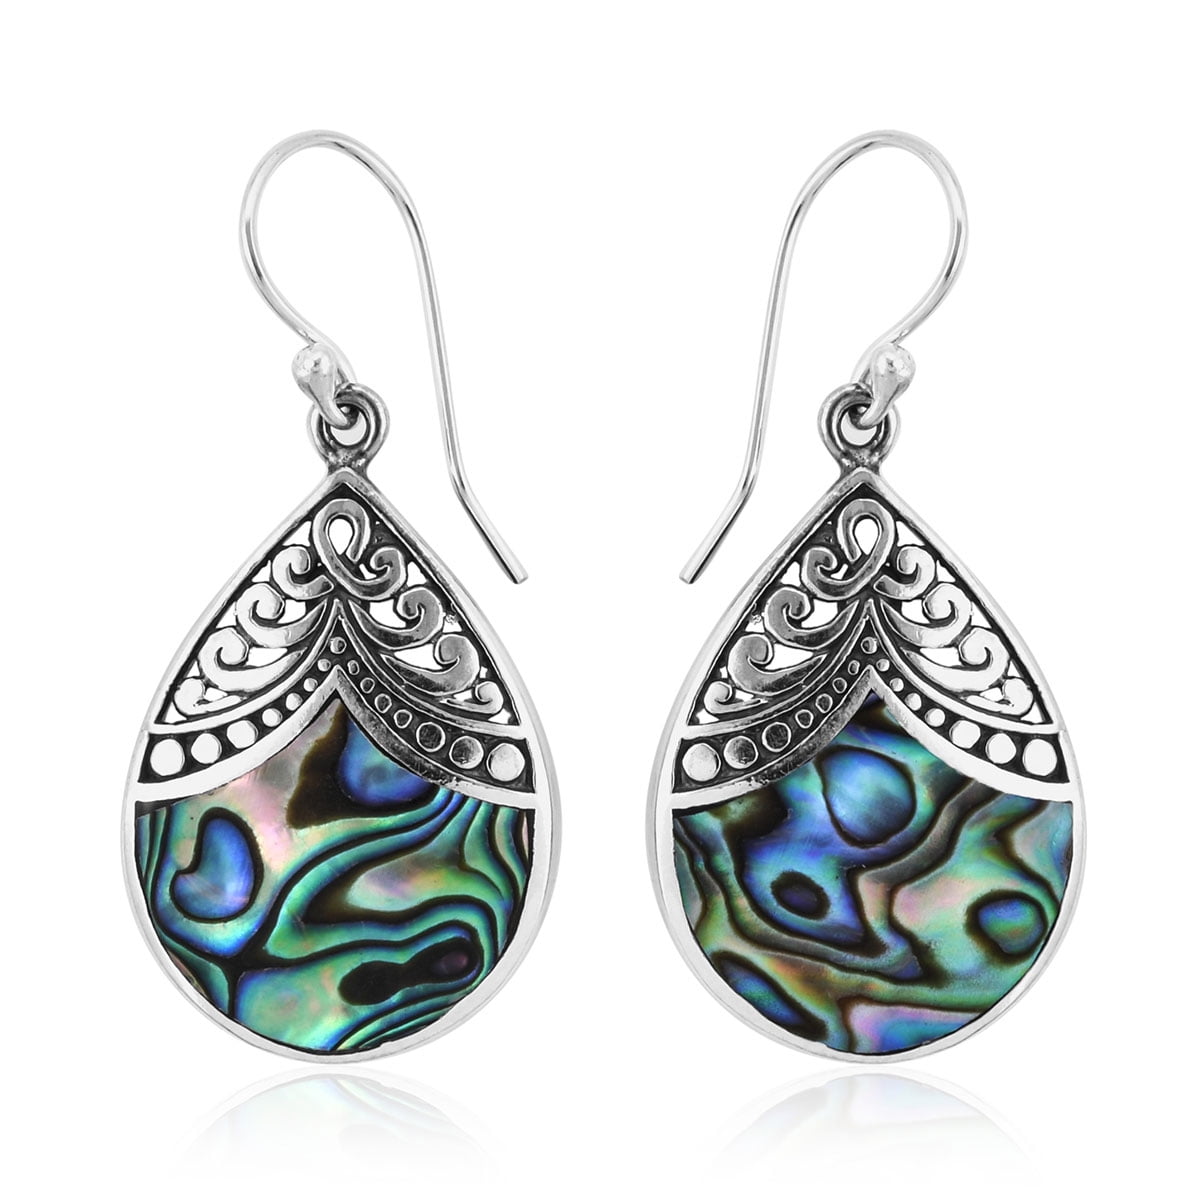 UNIQUE DESIGNER HANDMADE JEWELRY BY ARTISANS FIRE ABALONE SHELL IN 925 STERLING SILVER FINE FILIGREE ETHNIC TRIBAL FASHION DROP DANGLE BALINESE EARRING FOR WOMEN & GIRLS